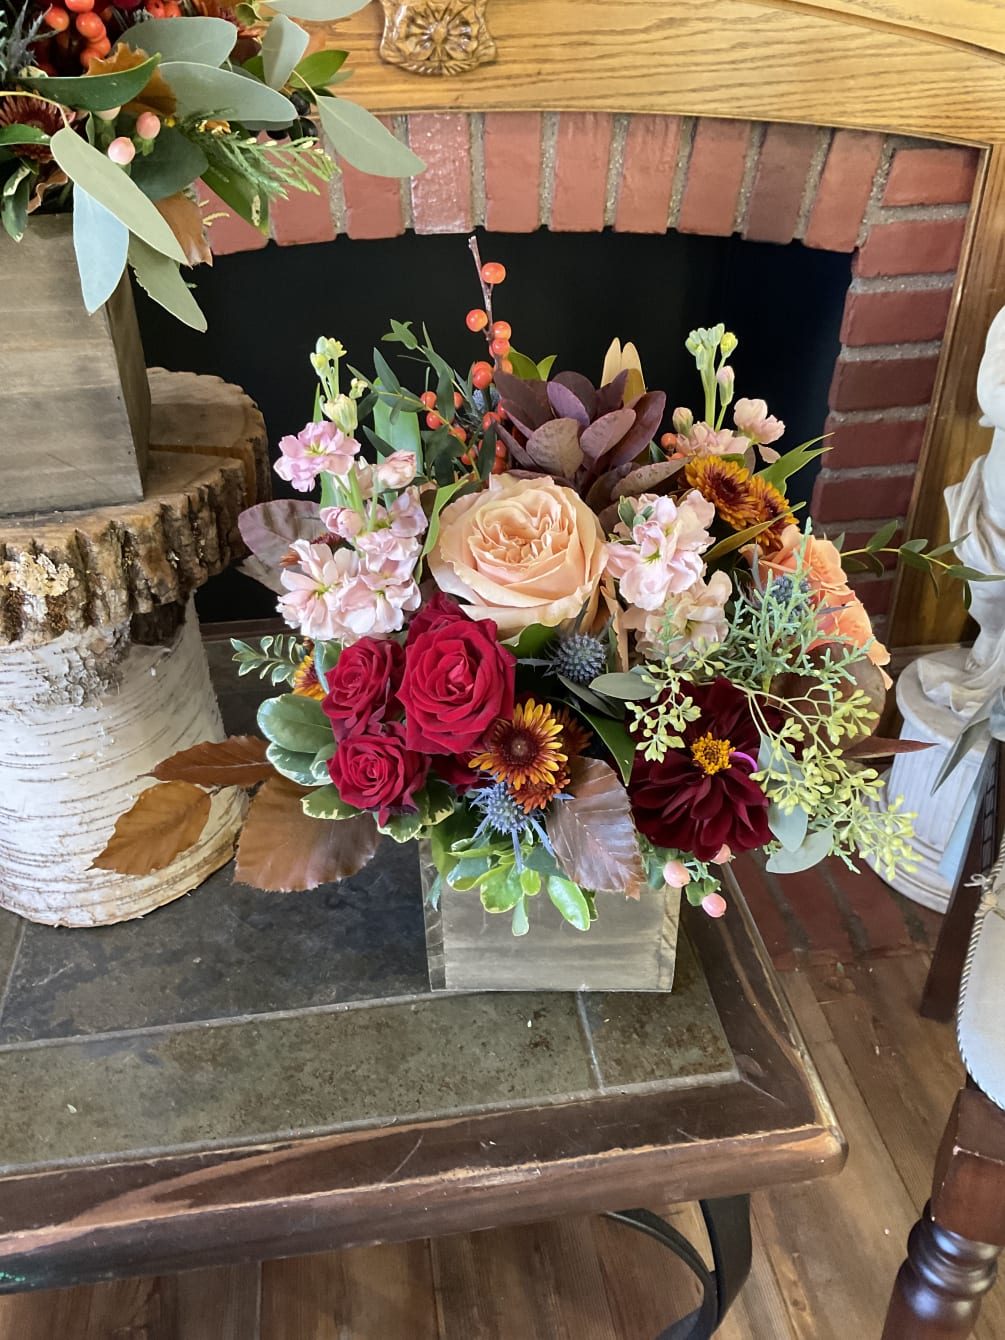 Simply chic and overflowing with fall blooms! This gorgeous arrangement is sure